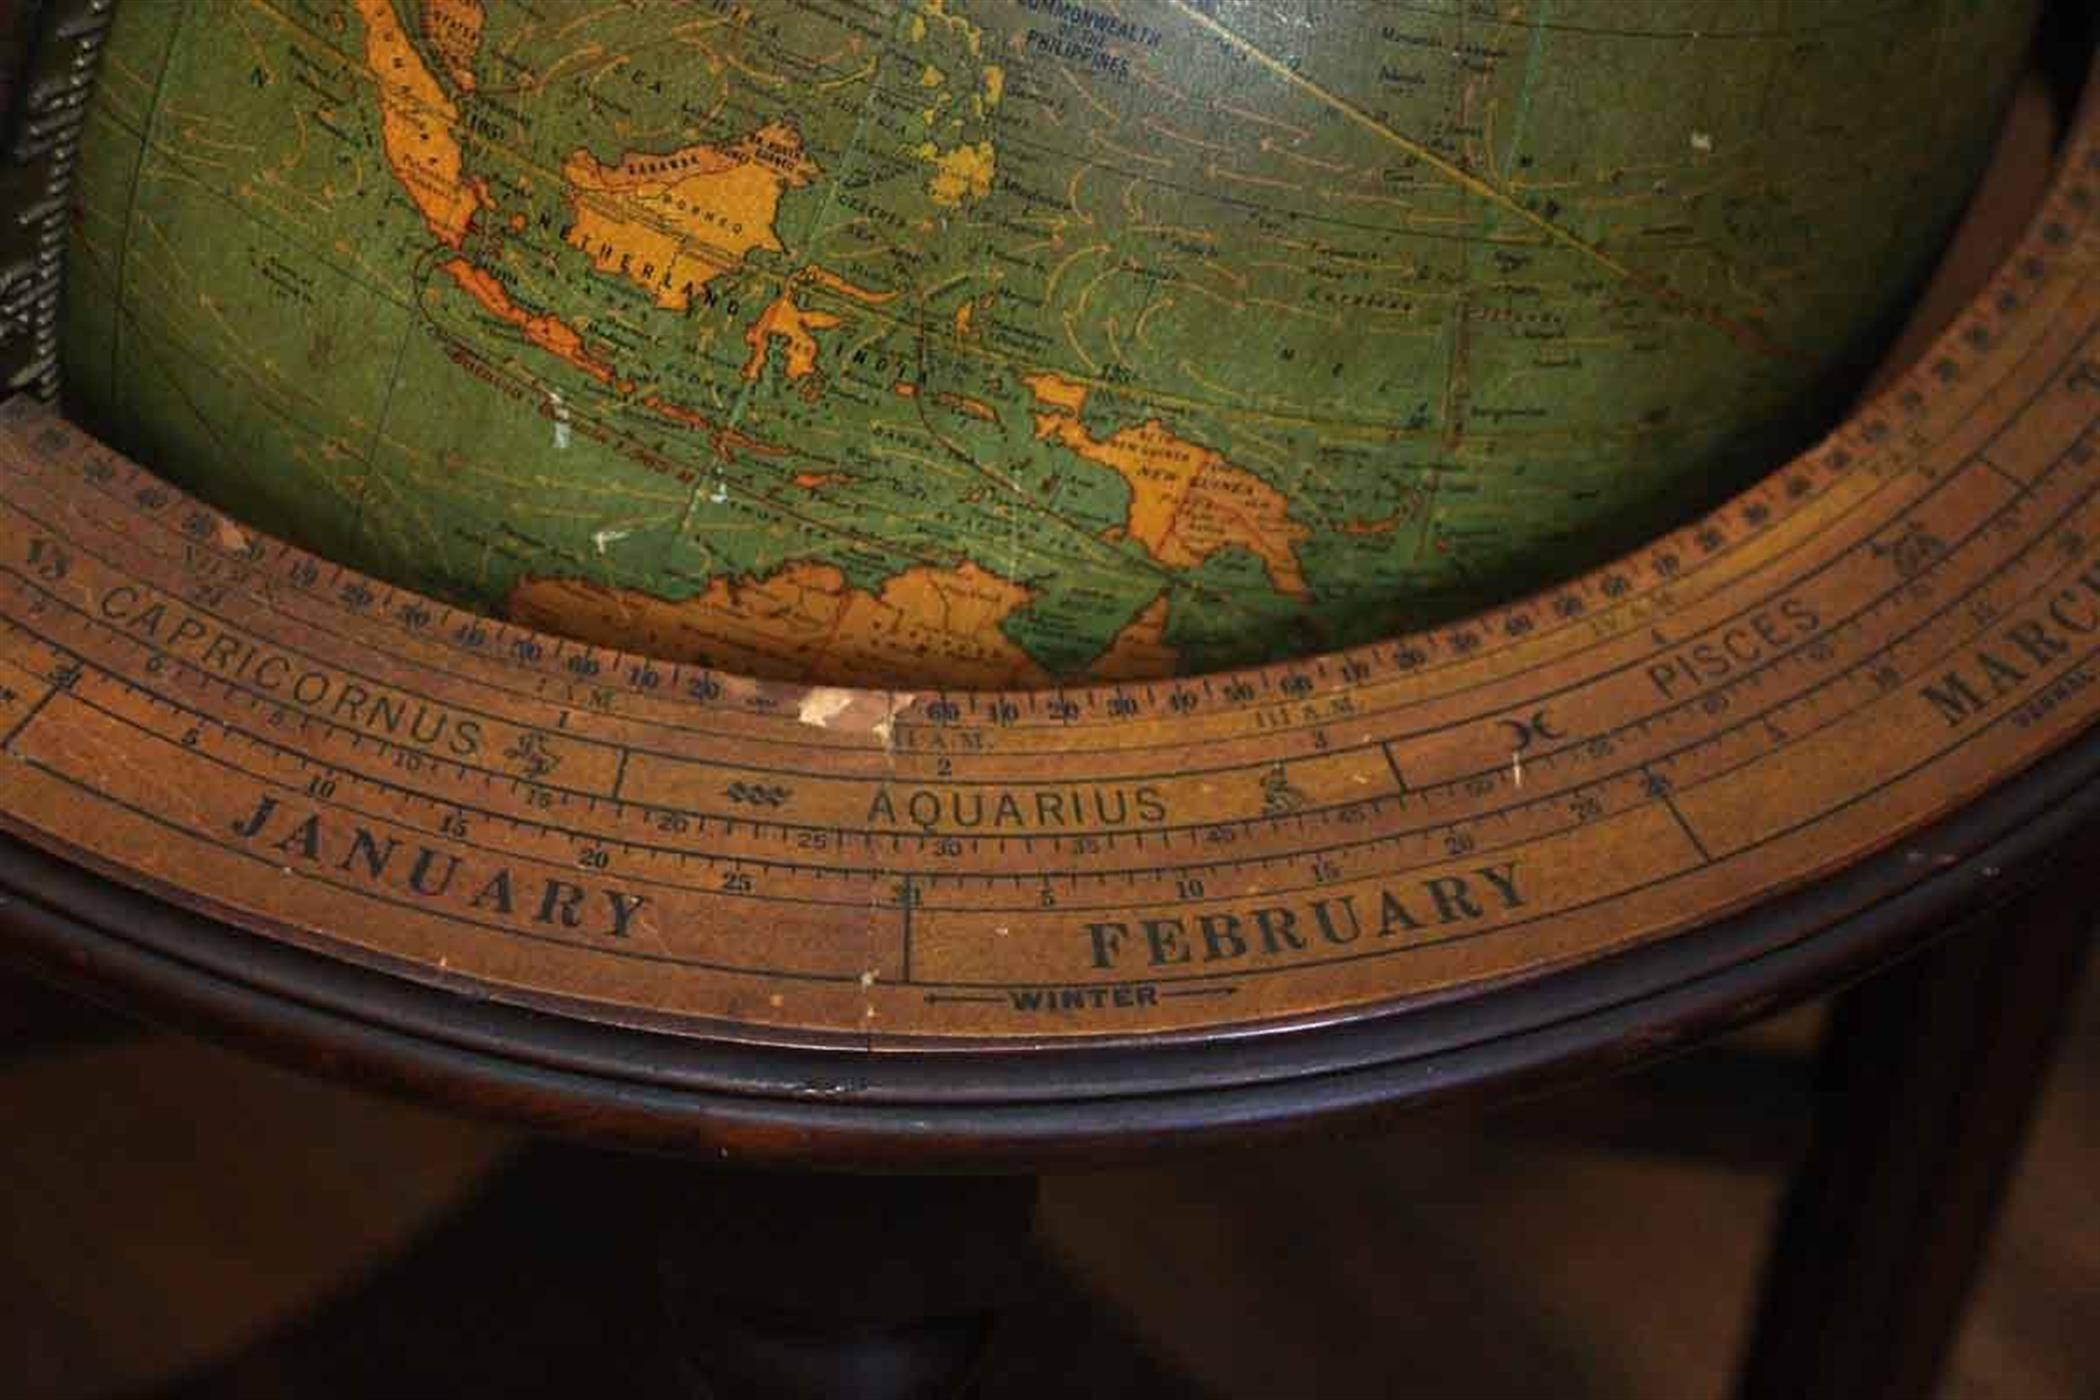 Elegant lighted glass library globe made by George F. Cram Co. in the 1930s. Set on a mahogany Stand with fluted, turned legs. Founded in 1869, the George F. Cram company has outlived almost all other 19th century map publishers to remain a major